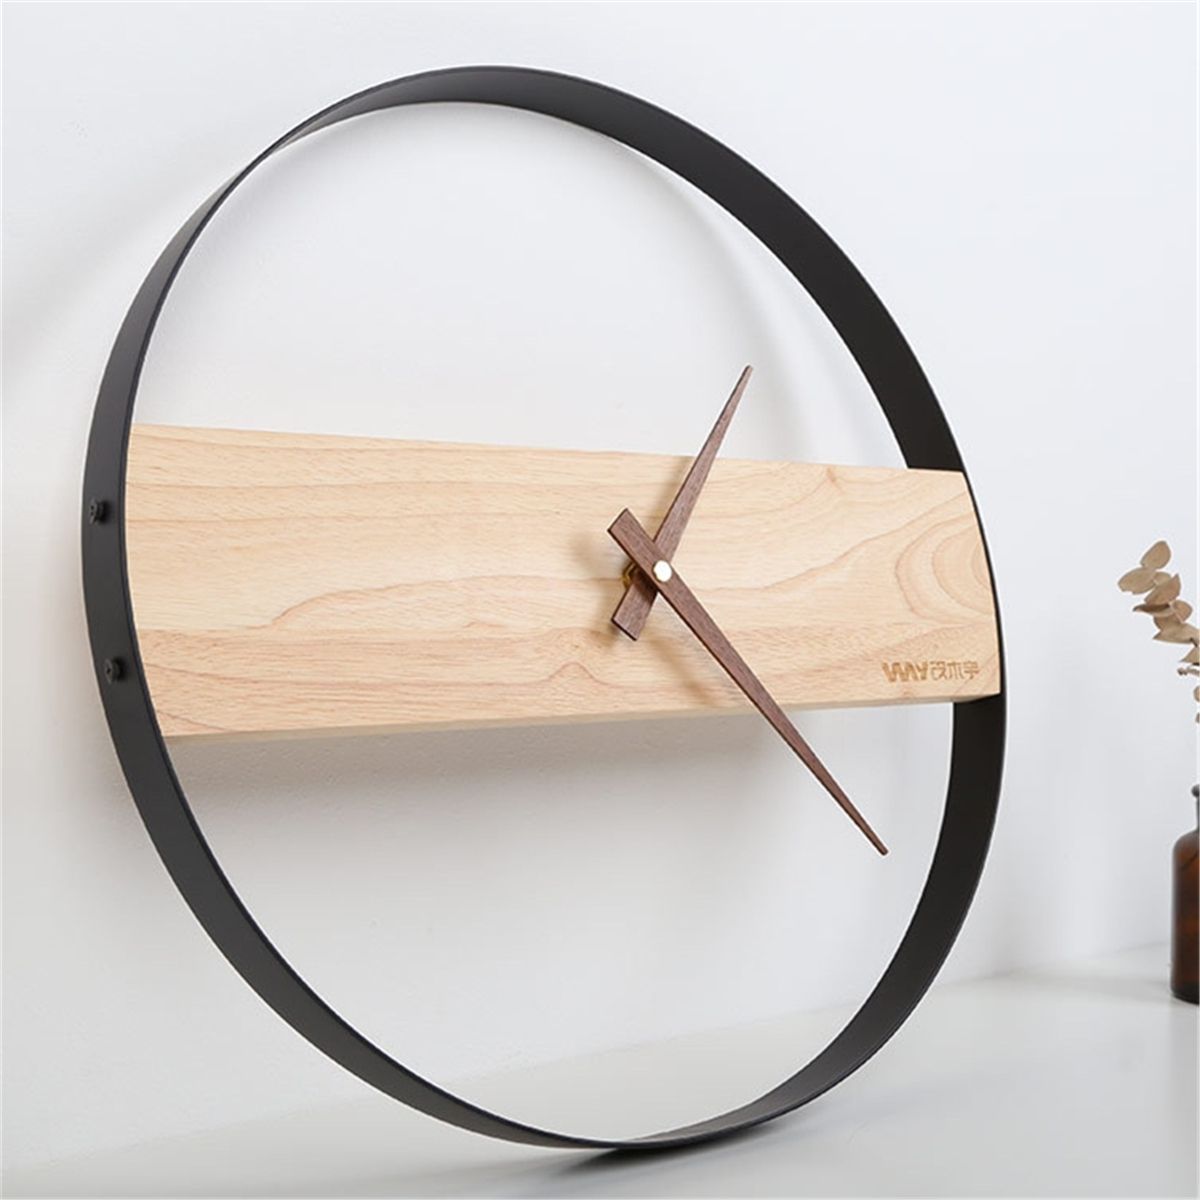 14quot16quot-Inddoor-Silent-Round-Hanging-Wall-Clock-Home-Office-Living-Room-Decorations-1630267